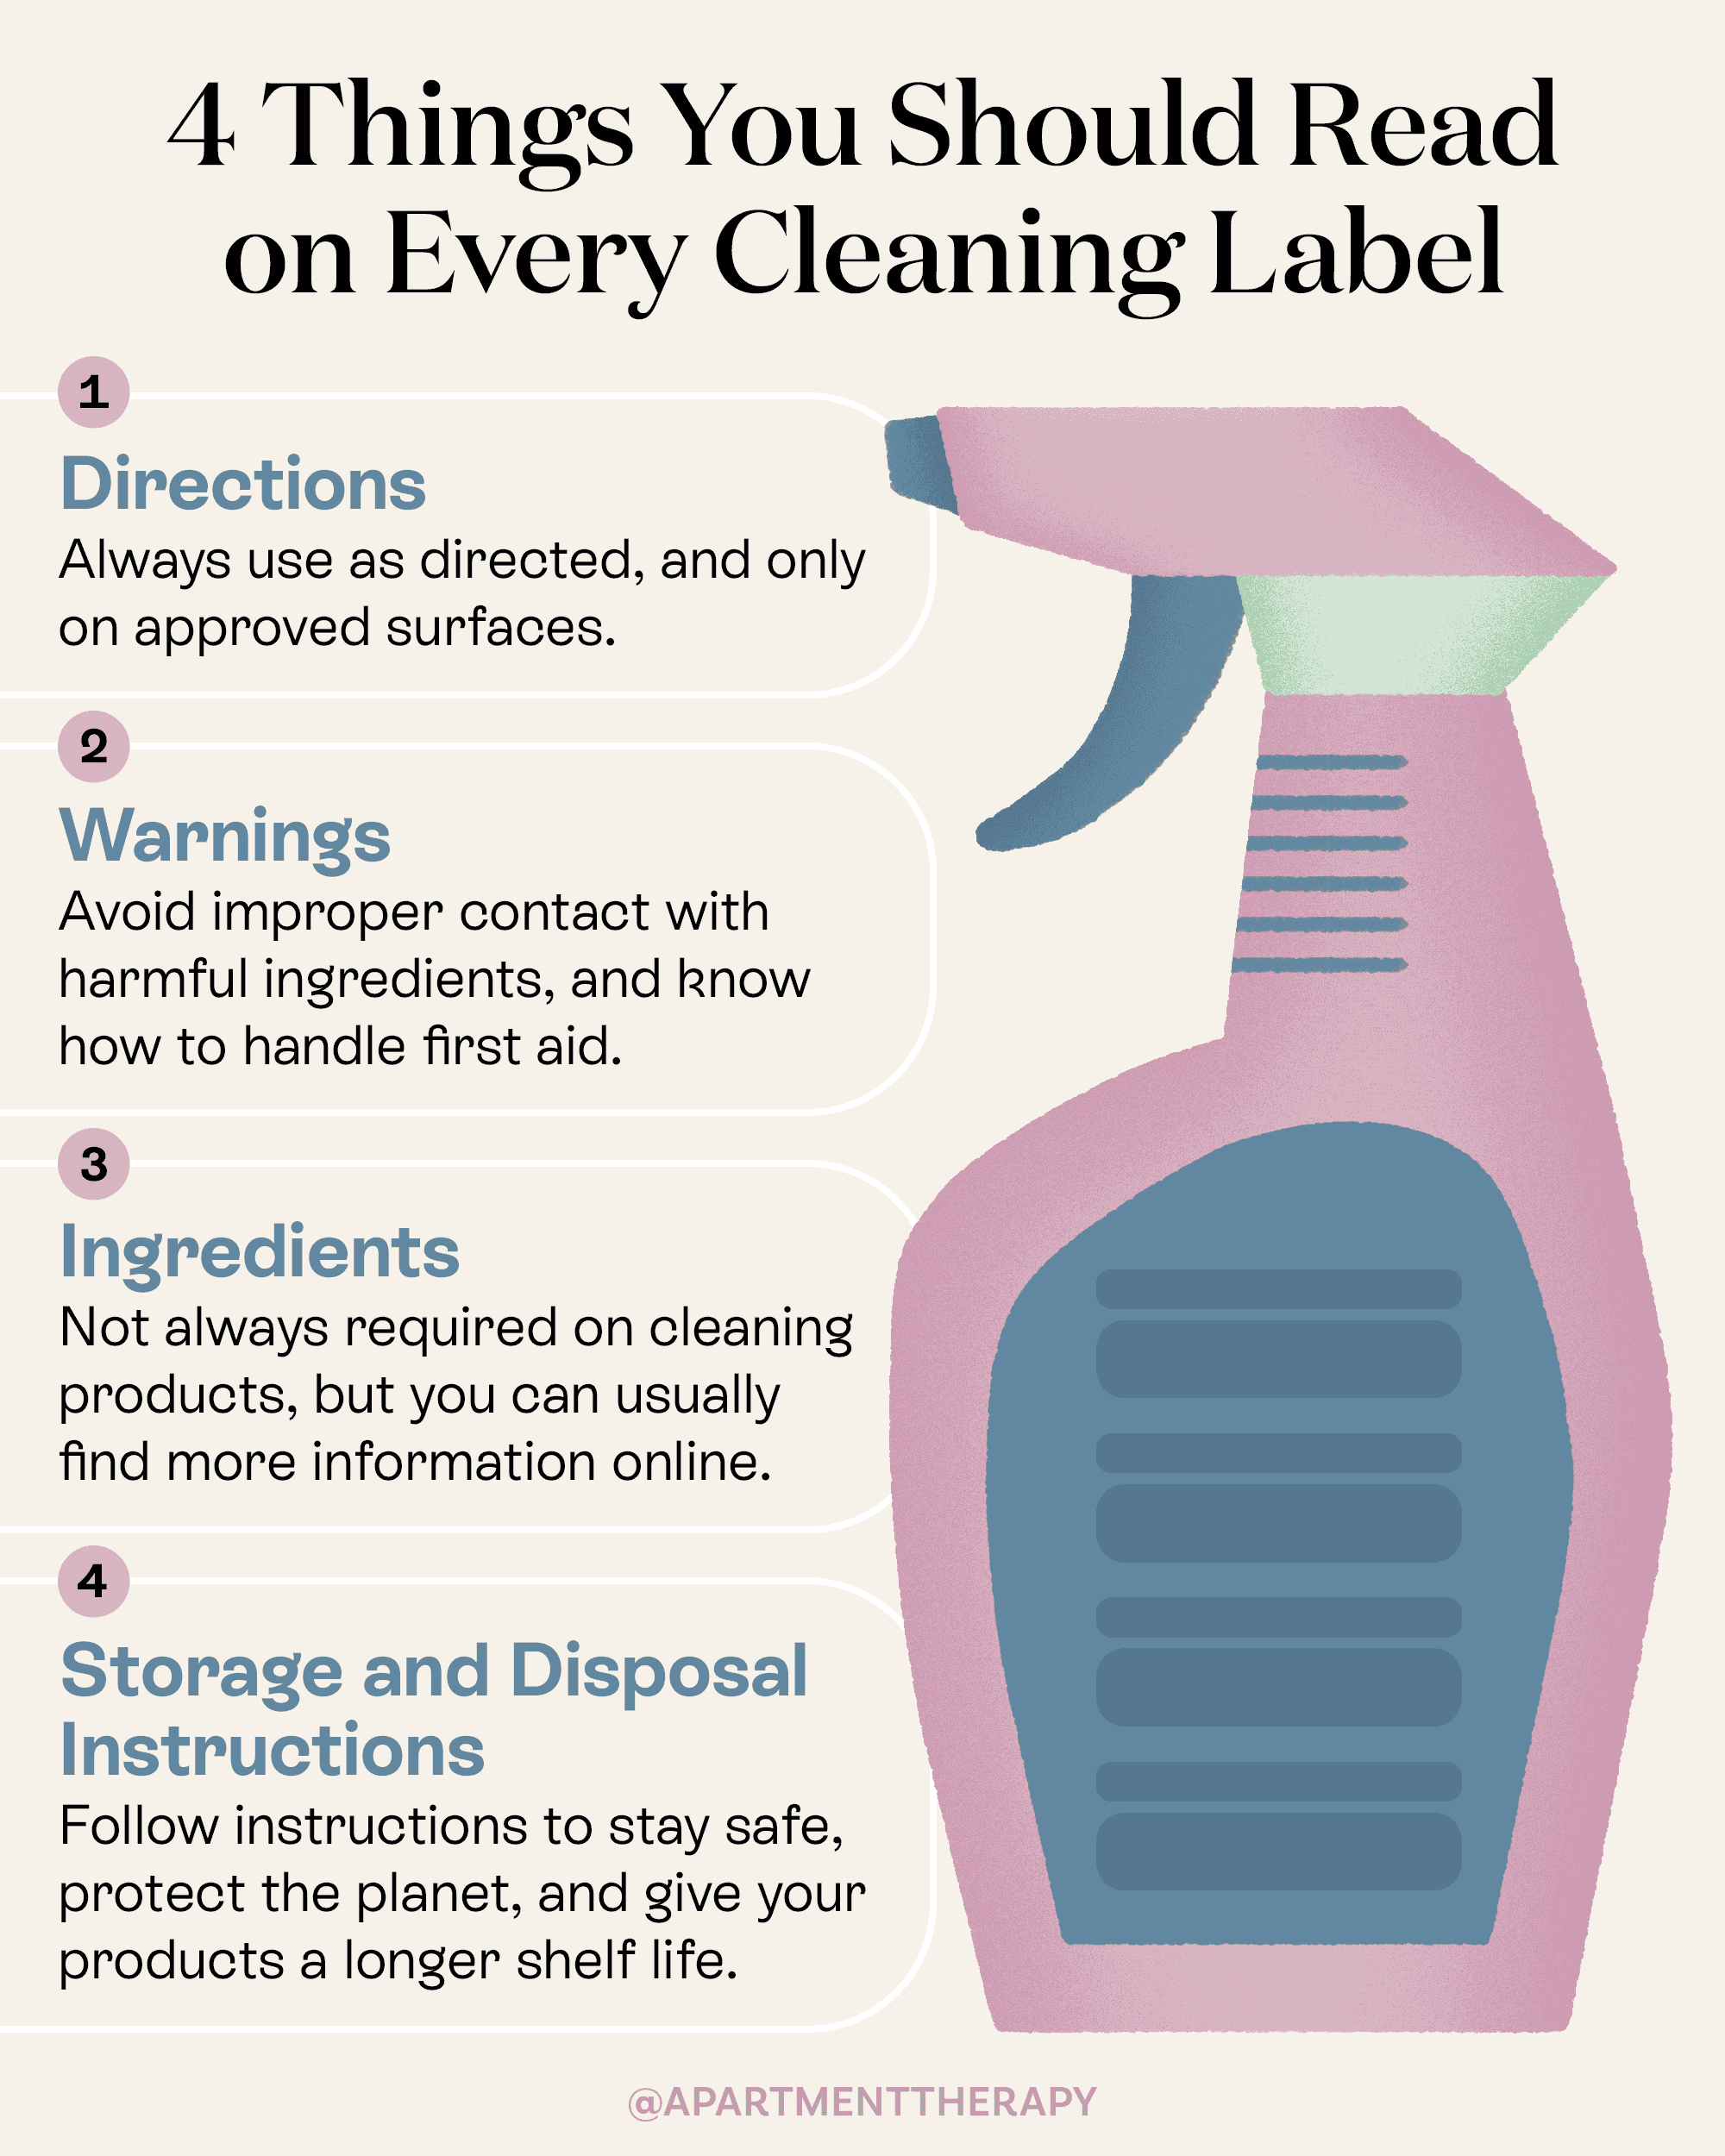 About Cleaning Product Ingredients